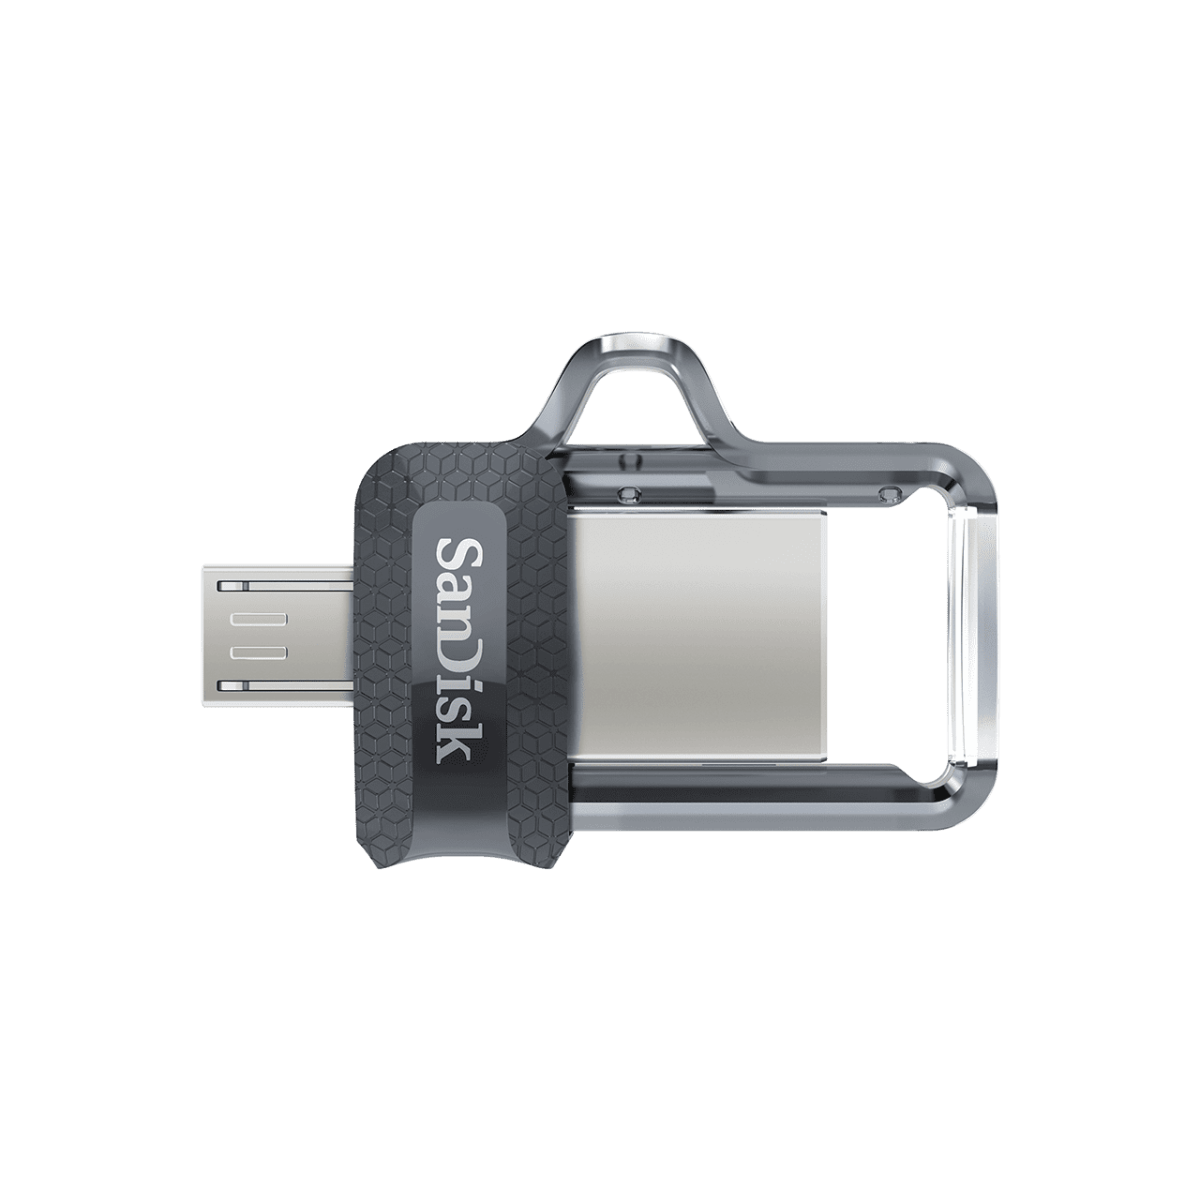 Ultra Dual Drive Usb M 3 Open Top2.Png.thumb .1280.1280 Sandisk &Lt;Div Class=&Quot;Active&Quot; Data-Sku=&Quot;Sddd3-016G-A46&Quot;&Gt; &Lt;H1&Gt;Instantly Free Up Space On Your Android Smartphone&Lt;/H1&Gt; &Lt;Div Class=&Quot;Inheritpara Mb-4&Quot;&Gt; The Sandisk Ultra® Dual Drive M3.0 Makes It Easy To Transfer Content From Your Phone To Your Computer. With A Micro-Usb Connector On One End And A Usb 3.0 Connector On The Other, The Drive Lets You Move Content Easily Between Your Devices—From Your Android™ Smartphone Or Tablet To Your Laptop, Pc Or Mac Computer&Lt;A Class=&Quot;Disclosure&Quot; Href=&Quot;Https://Shop.westerndigital.com/Products/Usb-Flash-Drives/Sandisk-Ultra-Dual-Drive-M30-Usb-3-0-Micro-Usb#Disclosures&Quot; Target=&Quot;_Self&Quot; Rel=&Quot;Noopener Noreferrer&Quot; Aria-Labelledby=&Quot;Disclosures&Quot;&Gt;&Lt;Sup&Gt;1&Lt;/Sup&Gt;&Lt;/A&Gt;. The Usb 3.0 Connector Is High-Performance And Backward-Compatible With Usb 2.0 Ports. The Sandisk® Memory Zone App&Lt;A Class=&Quot;Disclosure&Quot; Href=&Quot;Https://Shop.westerndigital.com/Products/Usb-Flash-Drives/Sandisk-Ultra-Dual-Drive-M30-Usb-3-0-Micro-Usb#Disclosures&Quot; Target=&Quot;_Self&Quot; Rel=&Quot;Noopener Noreferrer&Quot; Aria-Labelledby=&Quot;Disclosures&Quot;&Gt;&Lt;Sup&Gt;2&Lt;/Sup&Gt;&Lt;/A&Gt; For Android (Available On Google Play) Helps You Manage Your Device’s Memory And Your Content. &Lt;Strong&Gt;Warranty&Lt;/Strong&Gt; The Sandisk Ultra Flair Usb 3.0 Flash Drive Is Backed By A Five-Year Manufacturer Warranty&Lt;A Class=&Quot;Disclosure&Quot; Href=&Quot;Https://Shop.westerndigital.com/Products/Usb-Flash-Drives/Sandisk-Ultra-Flair-Usb-3-0#Disclosures&Quot; Target=&Quot;_Self&Quot; Rel=&Quot;Noopener Noreferrer&Quot; Aria-Labelledby=&Quot;Disclosures&Quot;&Gt;&Lt;Sup&Gt;2&Lt;/Sup&Gt;&Lt;/A&Gt; &Lt;/Div&Gt; &Lt;/Div&Gt; Sandisk Ultra Dual Drive M3.0 Flash Drive For Android Smartphones (32Gb)